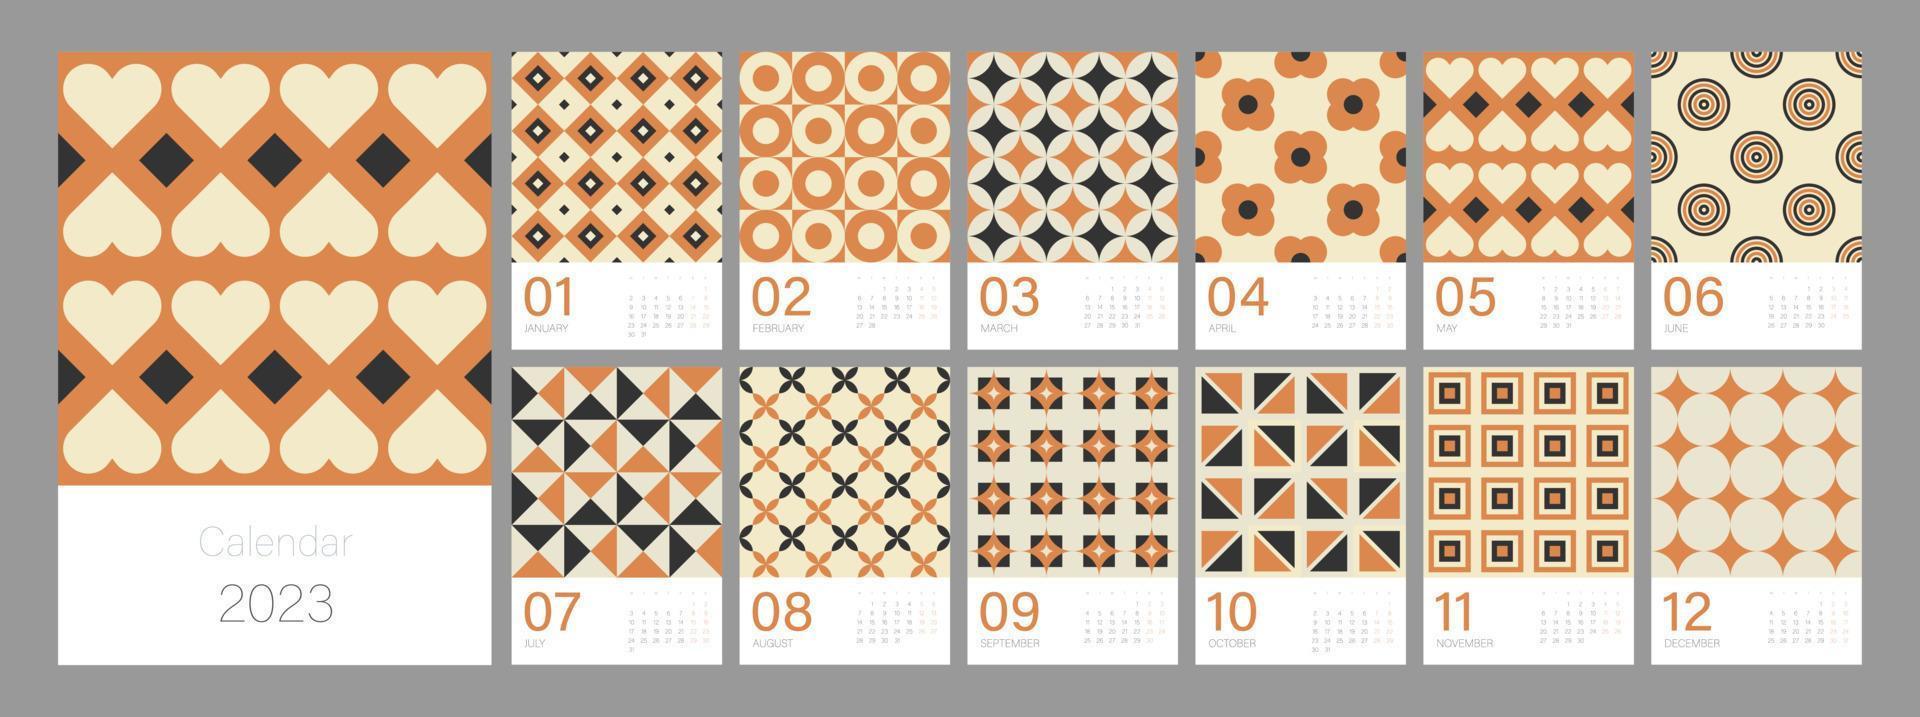 Calendar template for 2023. Vertical design with bright colorful retro geometric ornaments. Editable illustration page template A4, A3, set of 12 months with cover. Vector mesh. Week starts on Monday.